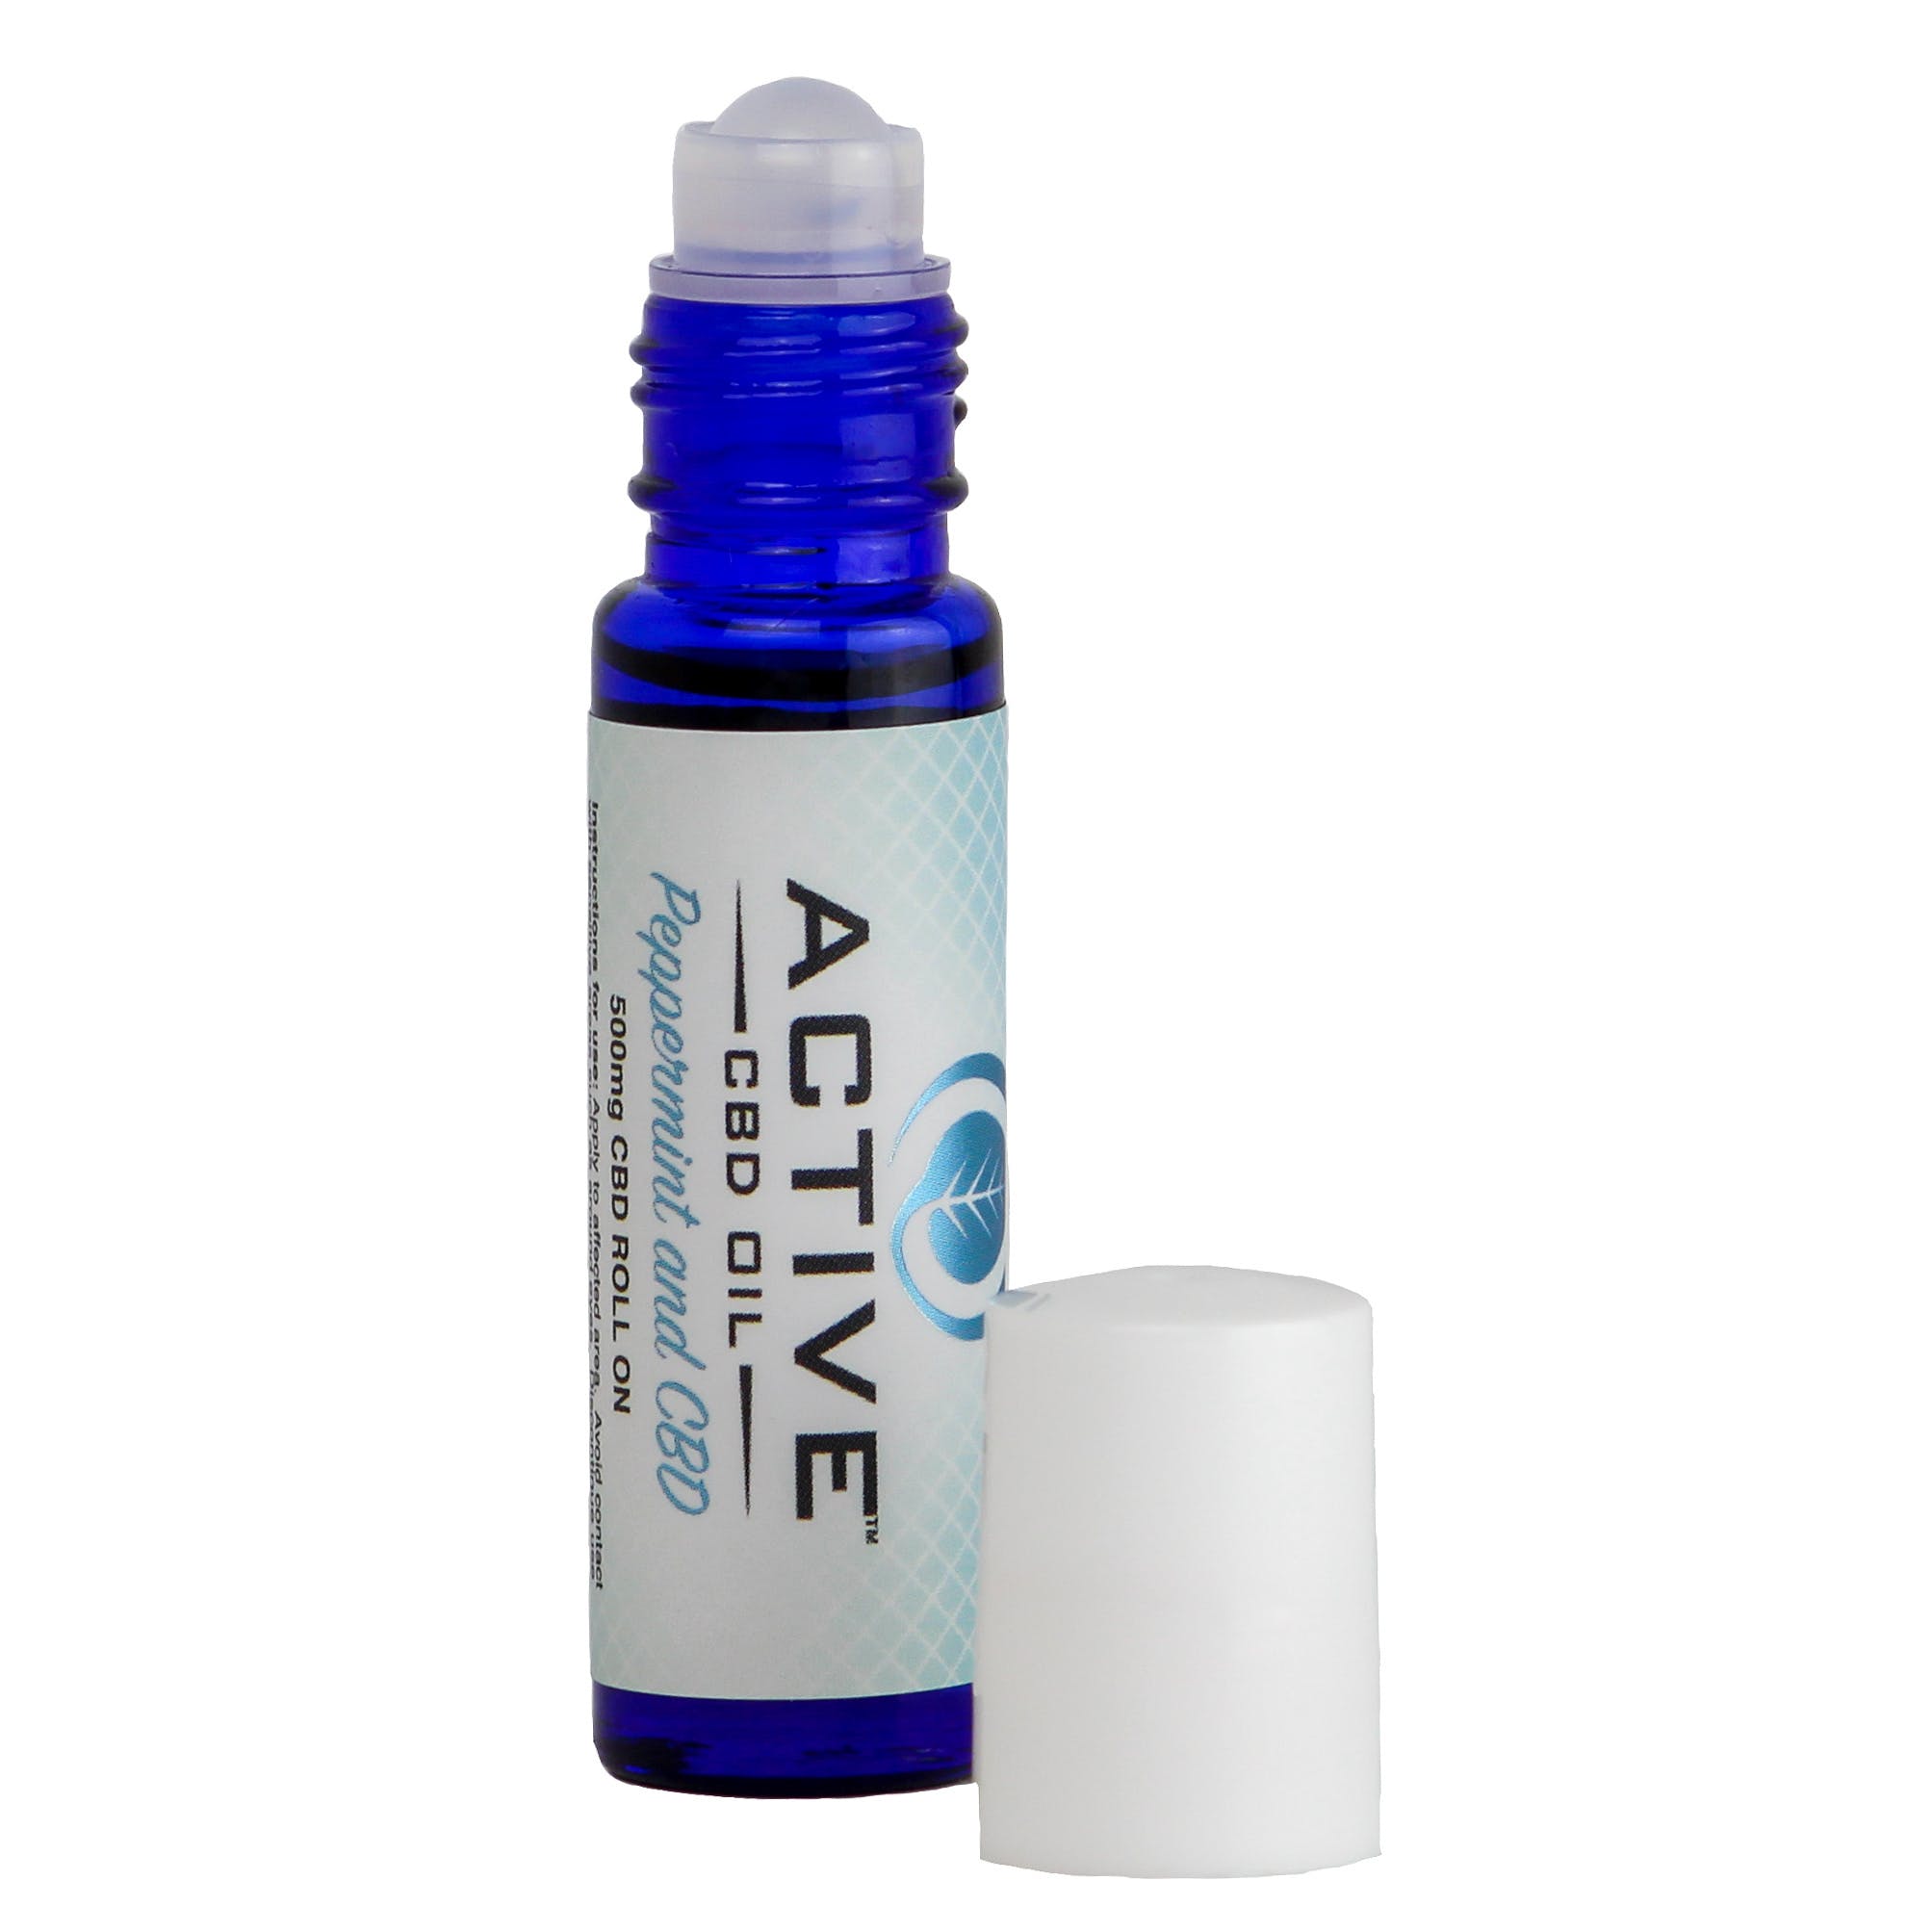 Active CBD Oil Peppermint Roll-on Topical 500mg